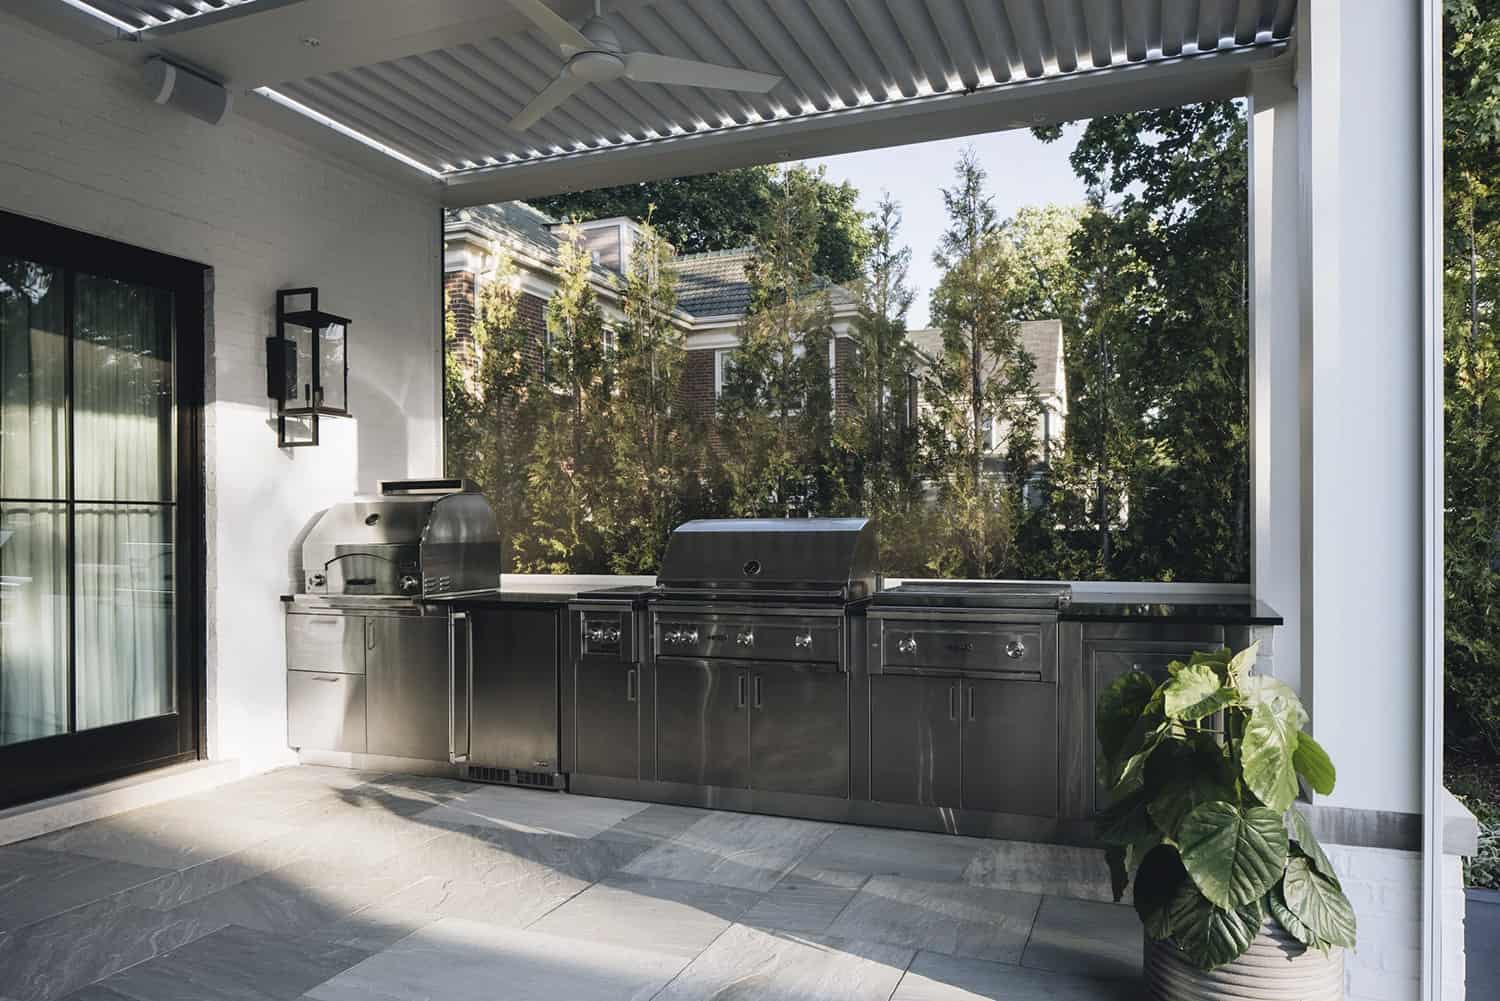   transitional-style-covered-outdoor-grill